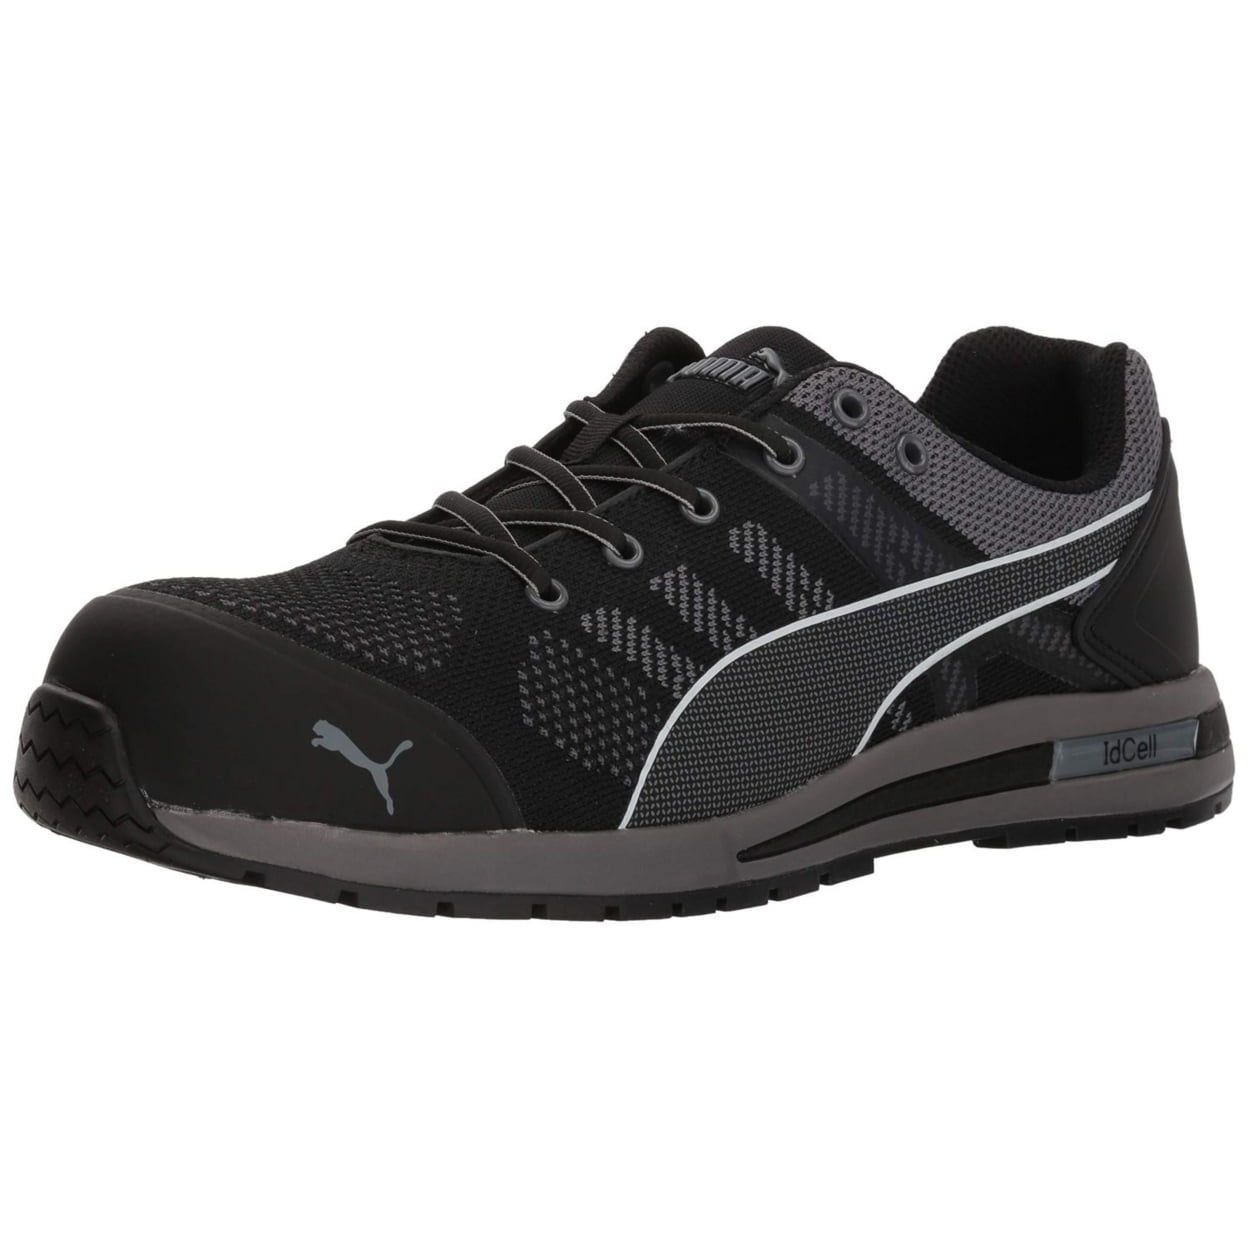 PUMA Safety Men's Elevate Knit Low Composite Toe ESD Work Shoe Black -  643165 ONE SIZE BLACK